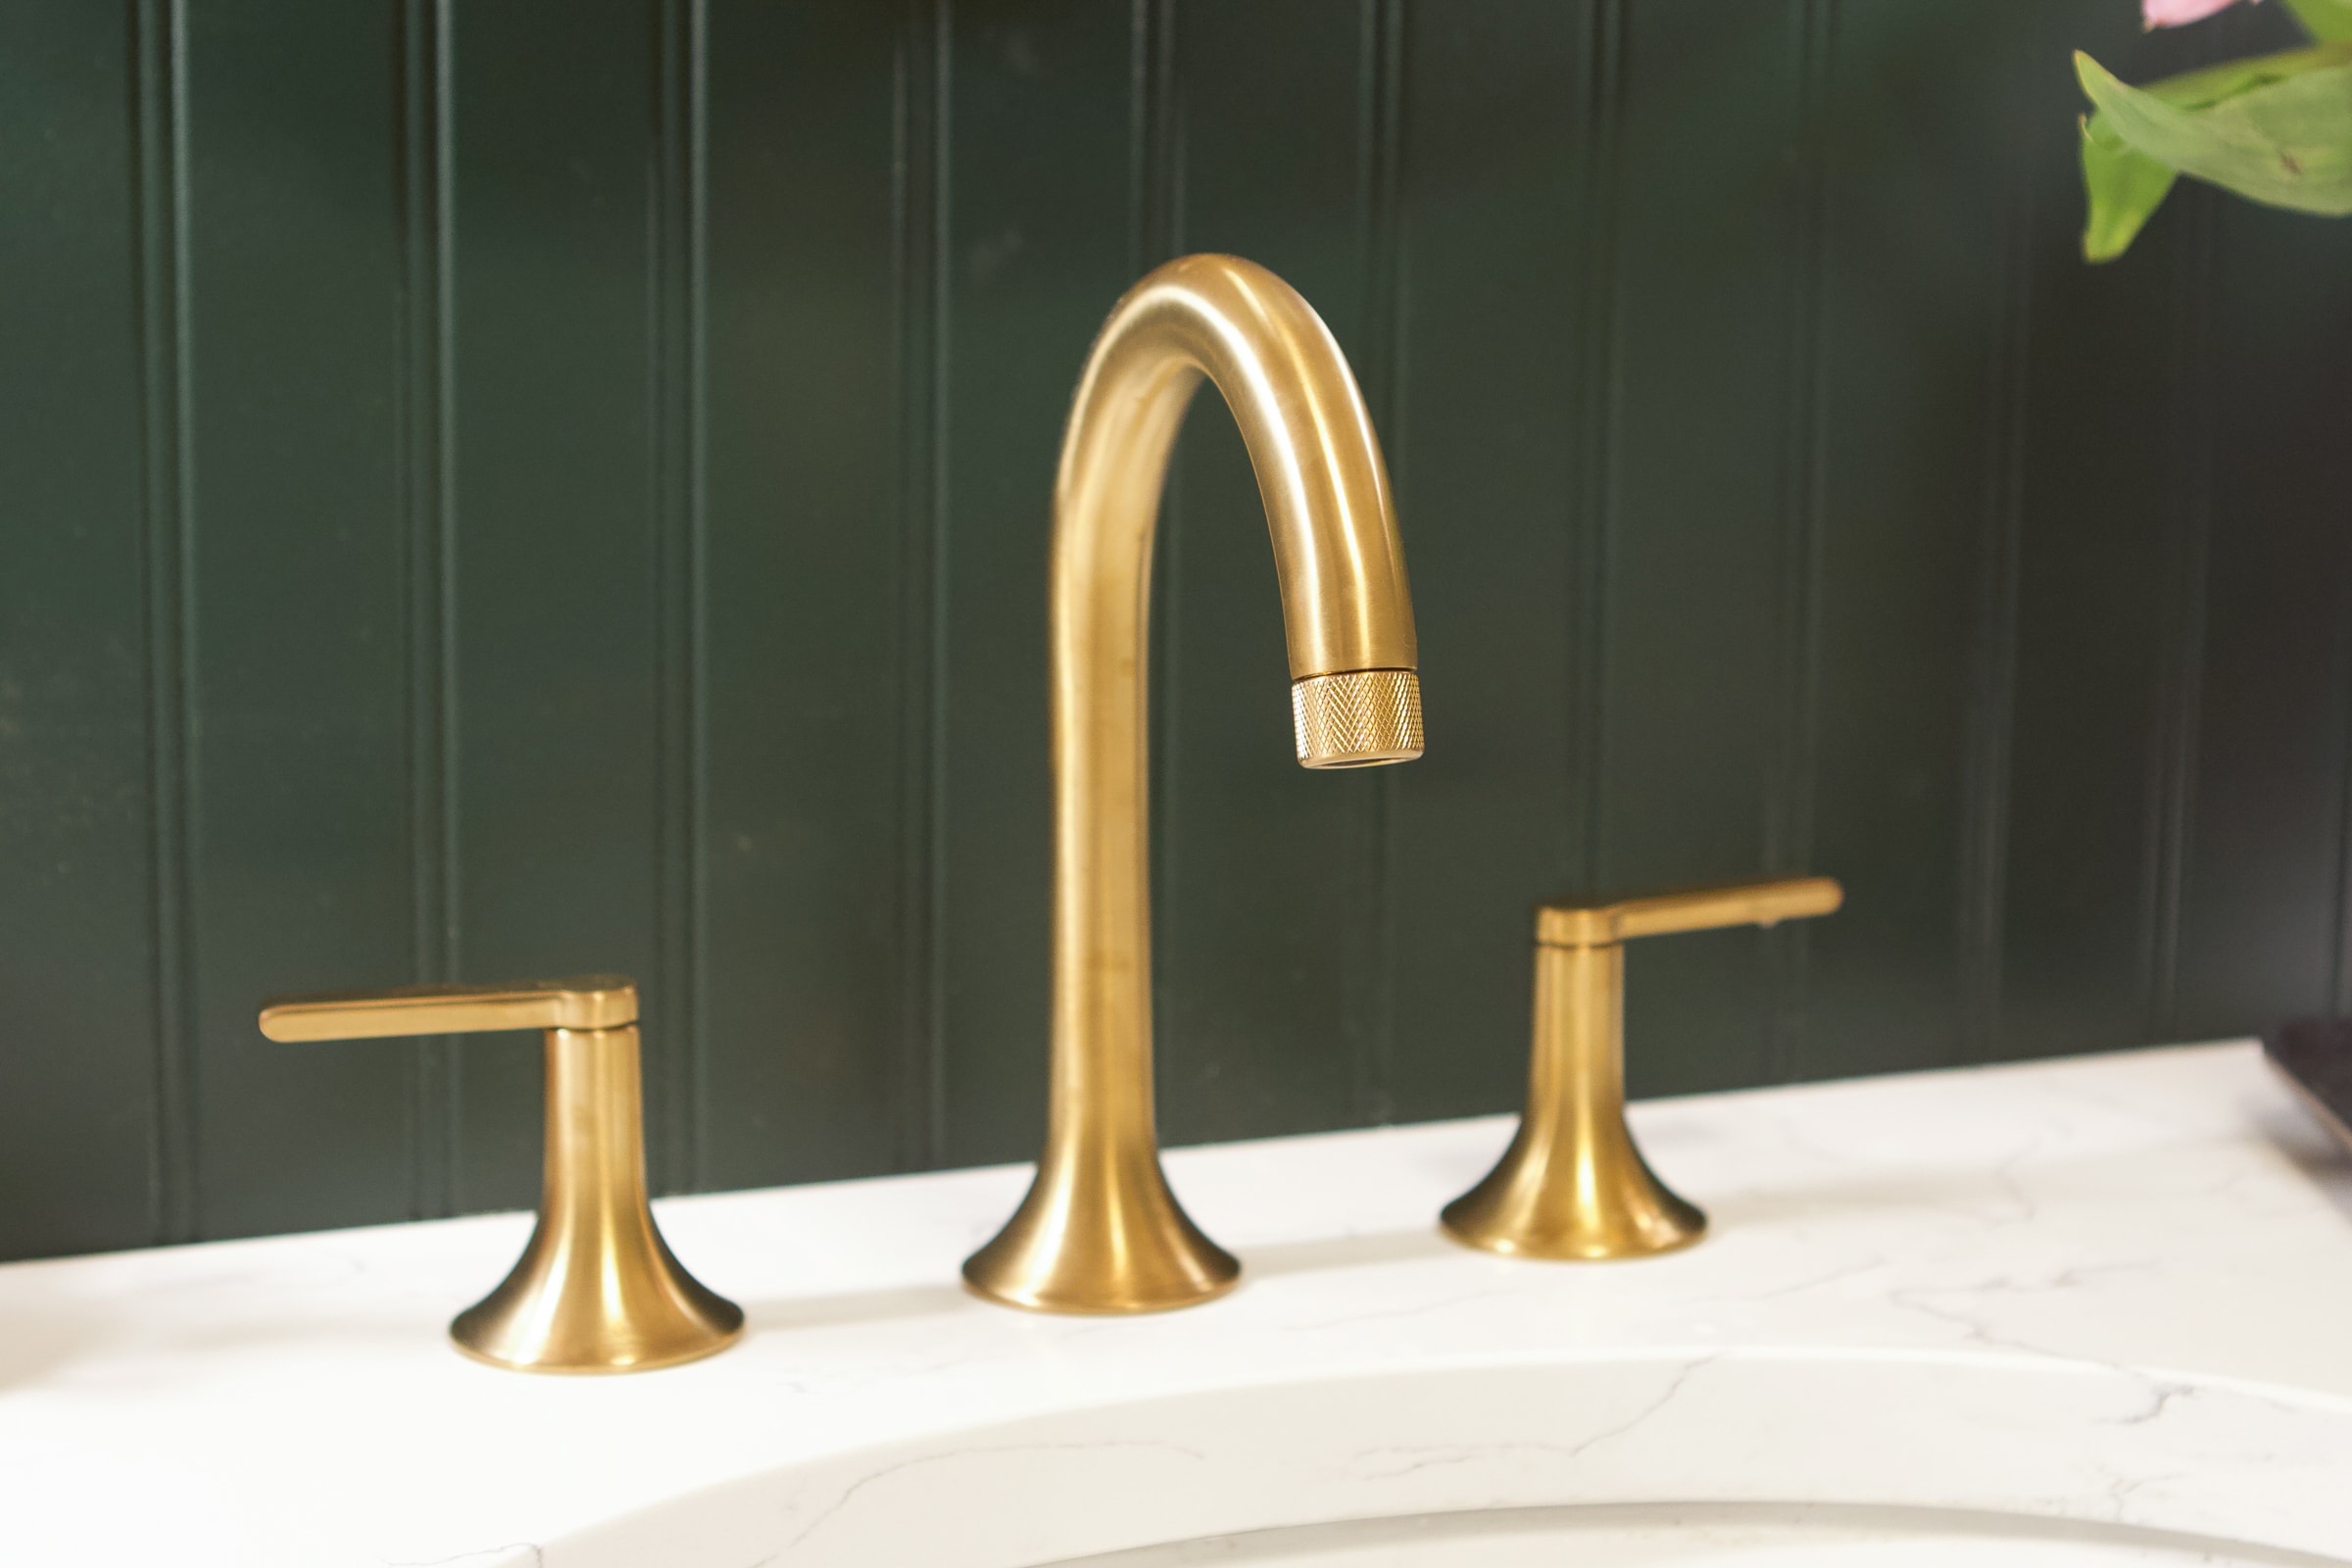 Gold faucet in the bathroom